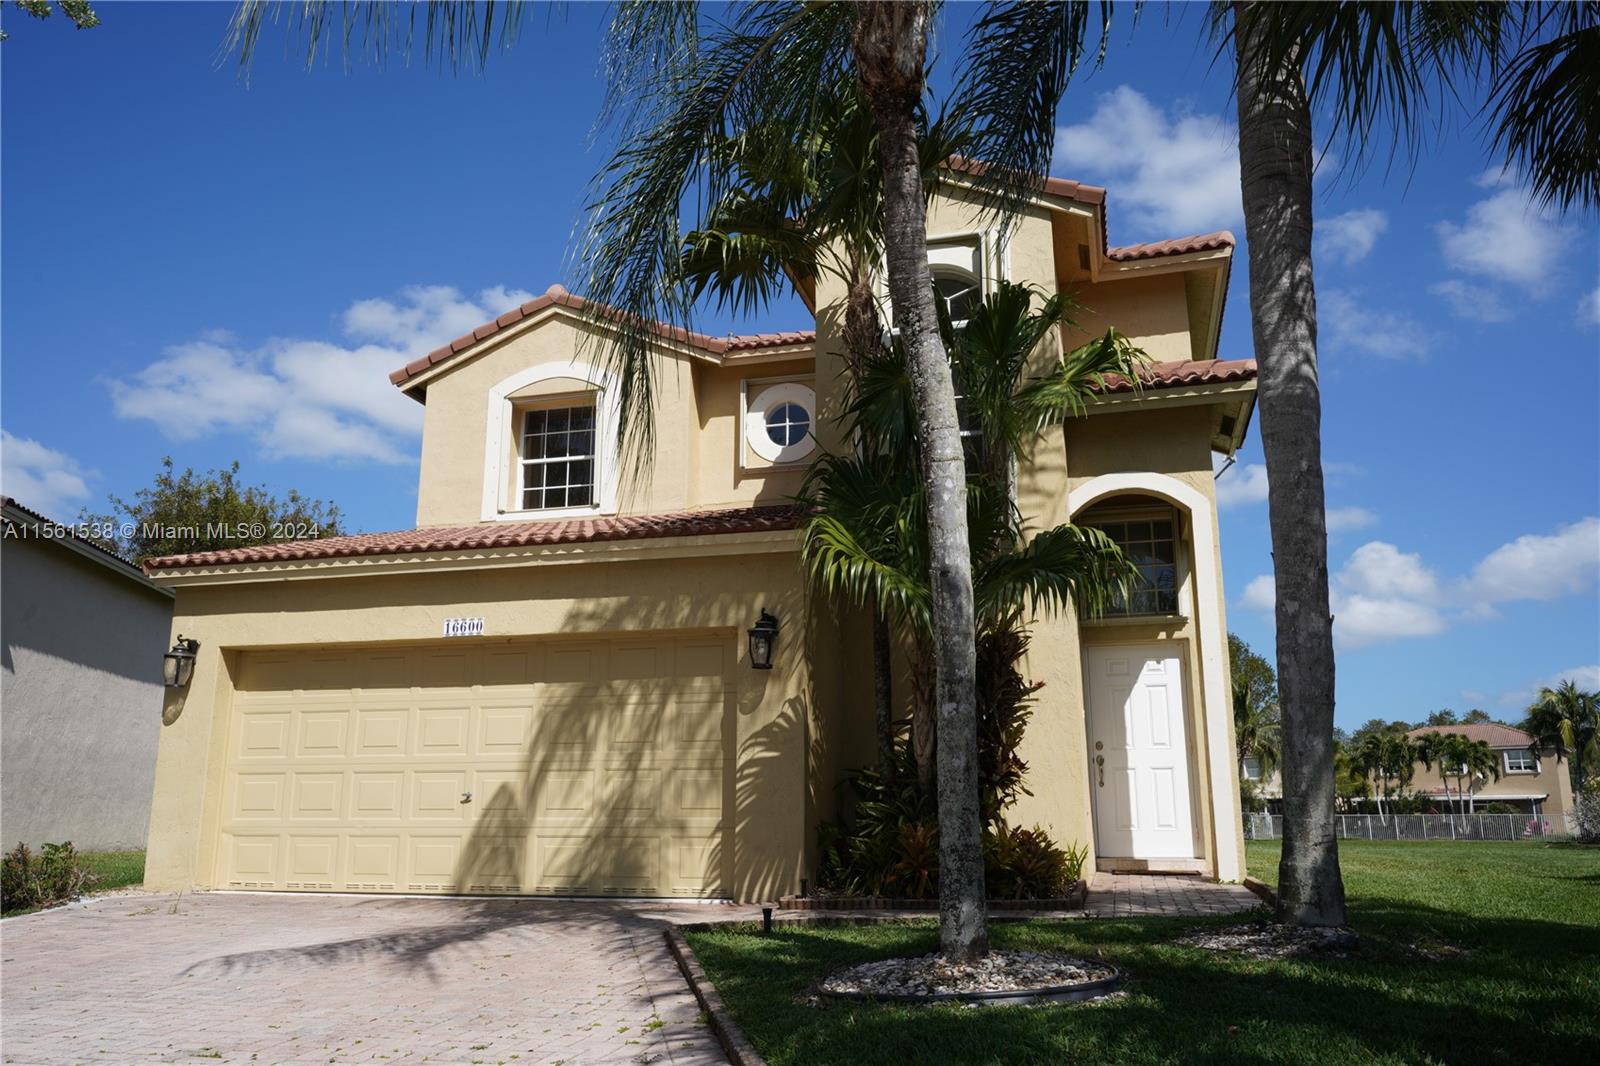 16600 Sapphire Mnr 16600, Weston, Florida 33331, 4 Bedrooms Bedrooms, ,2 BathroomsBathrooms,Residentiallease,For Rent,16600 Sapphire Mnr 16600,A11561538